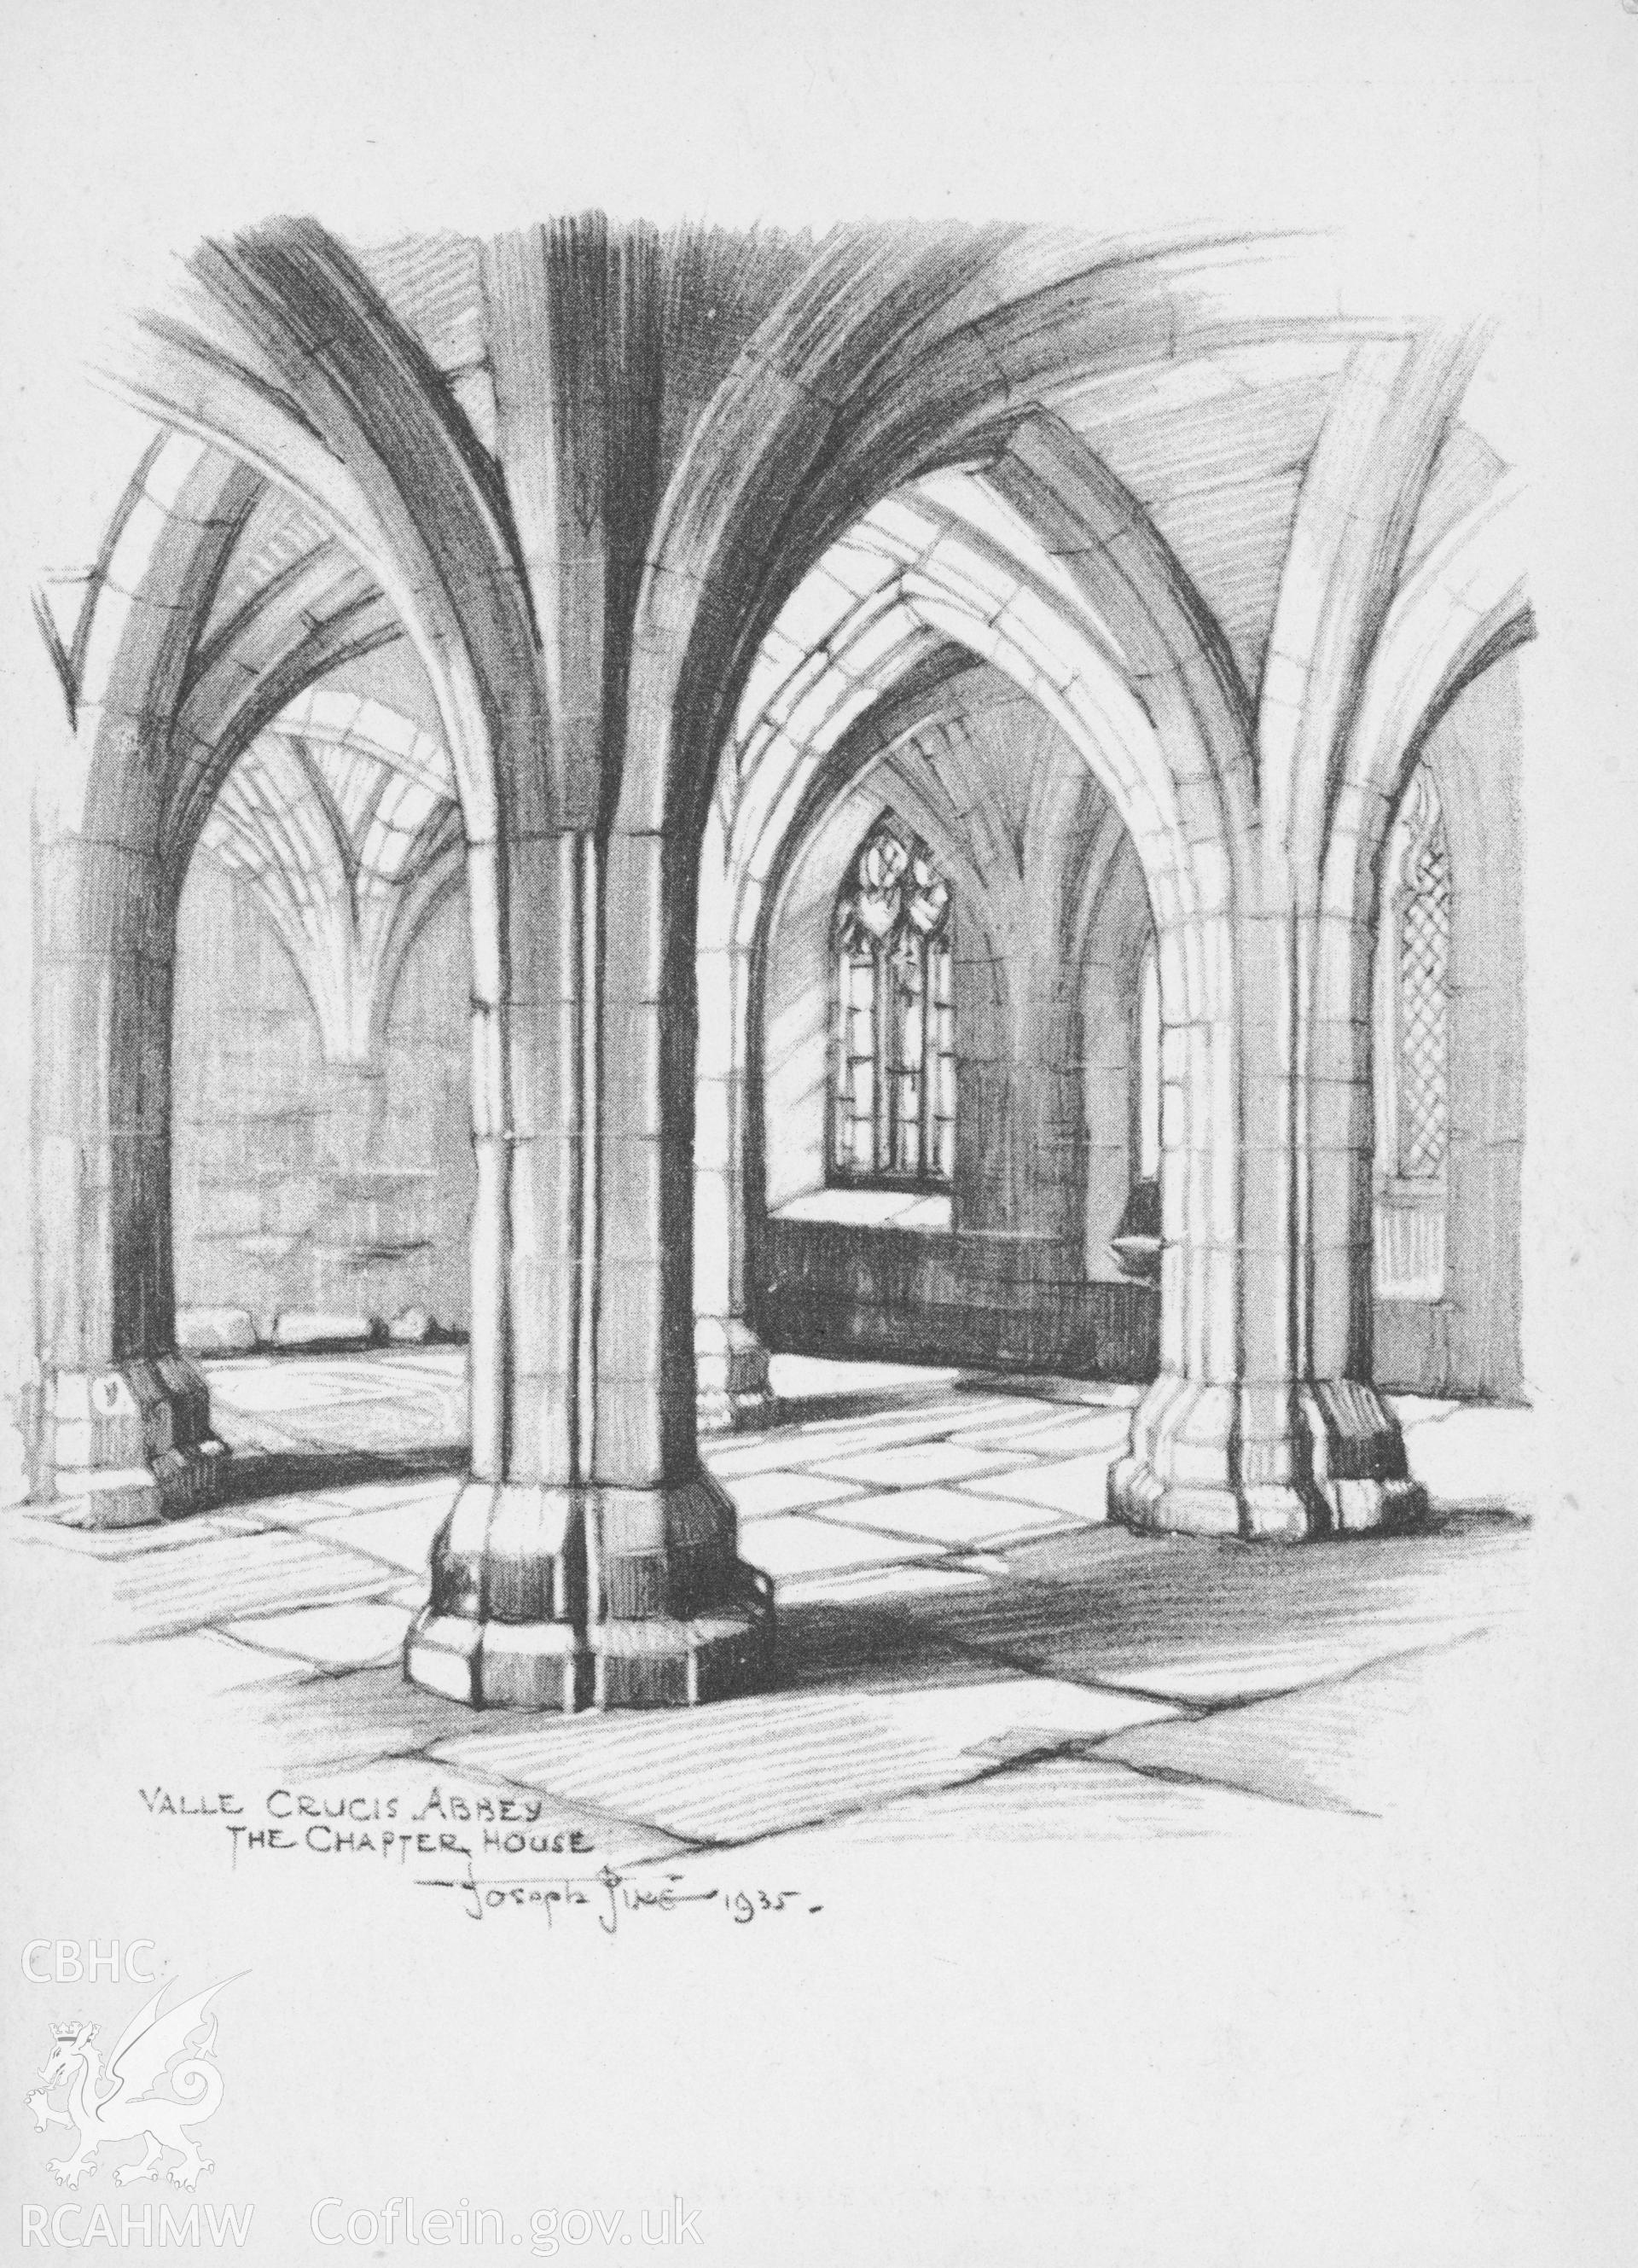 Digital copy of a black and white postcard showing Valle Crucis Abbey, the chapter house, by Joseph Pike, 1935.